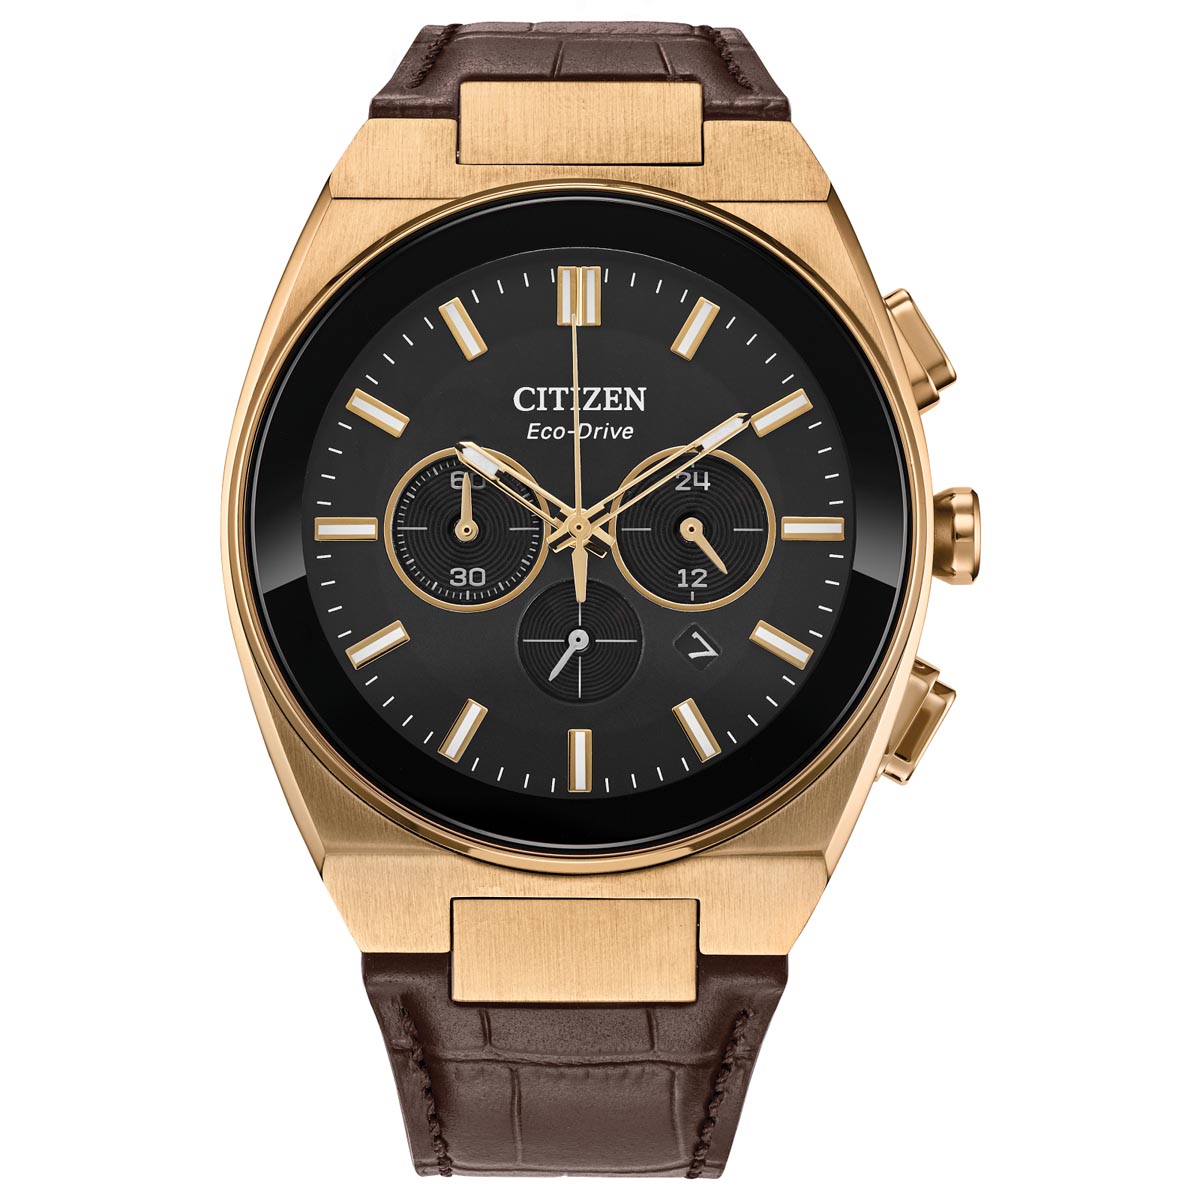 Citizen Axiom SC Mens Watch with Black Dial and Brown Leather Strap (eco drive movement)